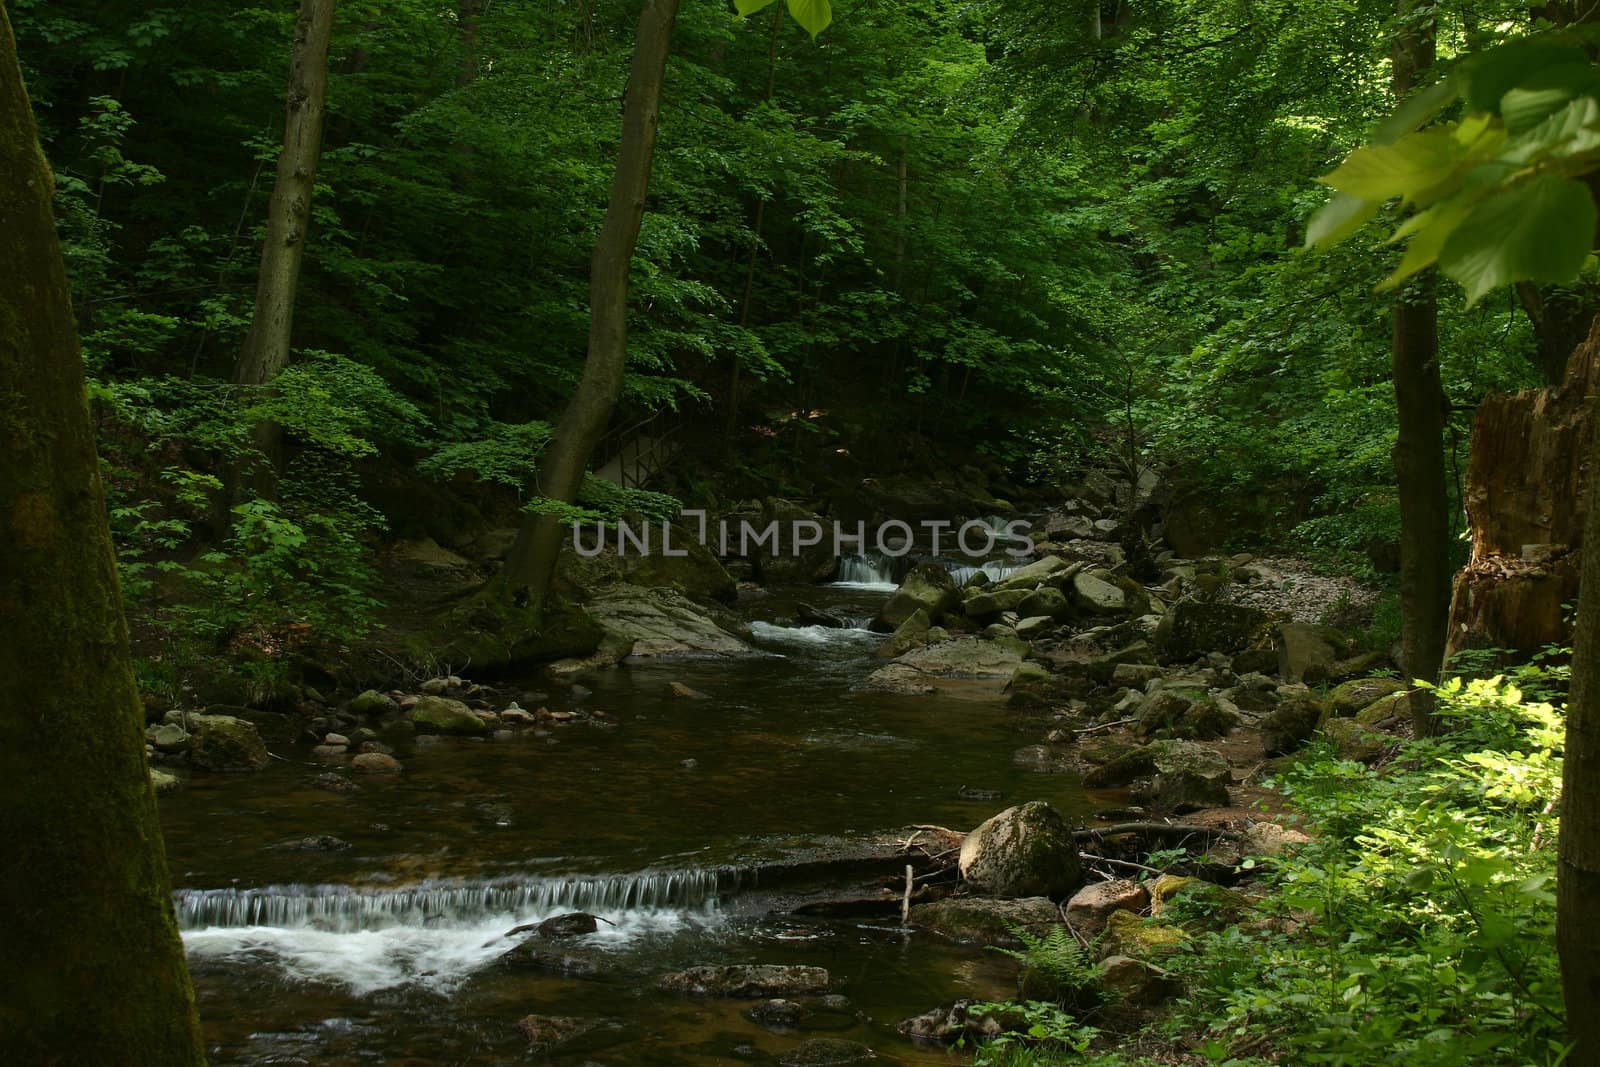 Mountain stream "Ilse" in the National Park "Upper Harz" in Saxony-Anhalt / Germany

